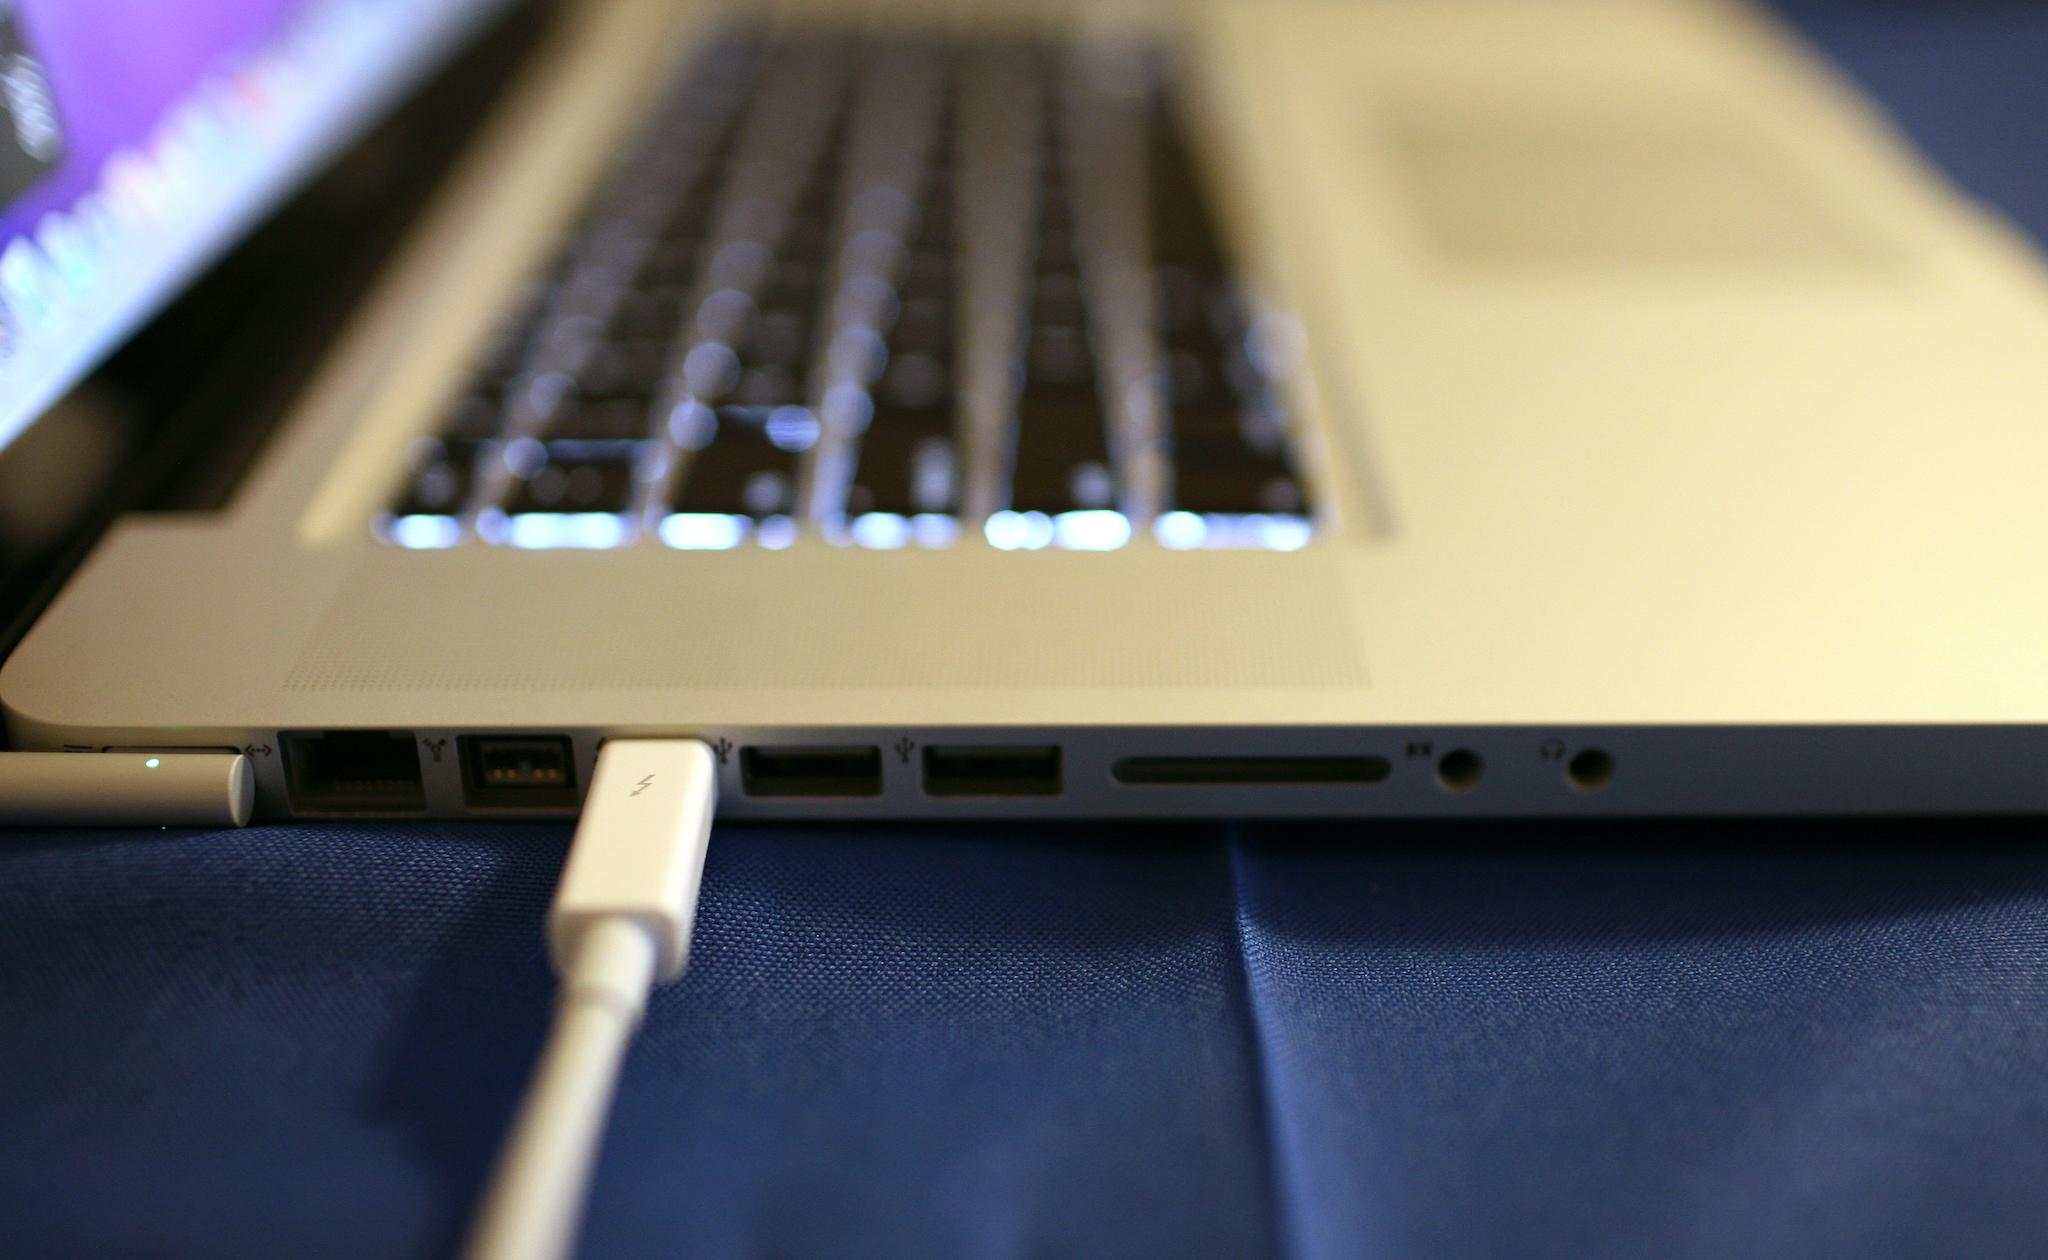 Apple's MacbookPro laptop that uses Intel's Thunderbolt (KIMIHIROHOSHINO/AFPvia Getty Images)